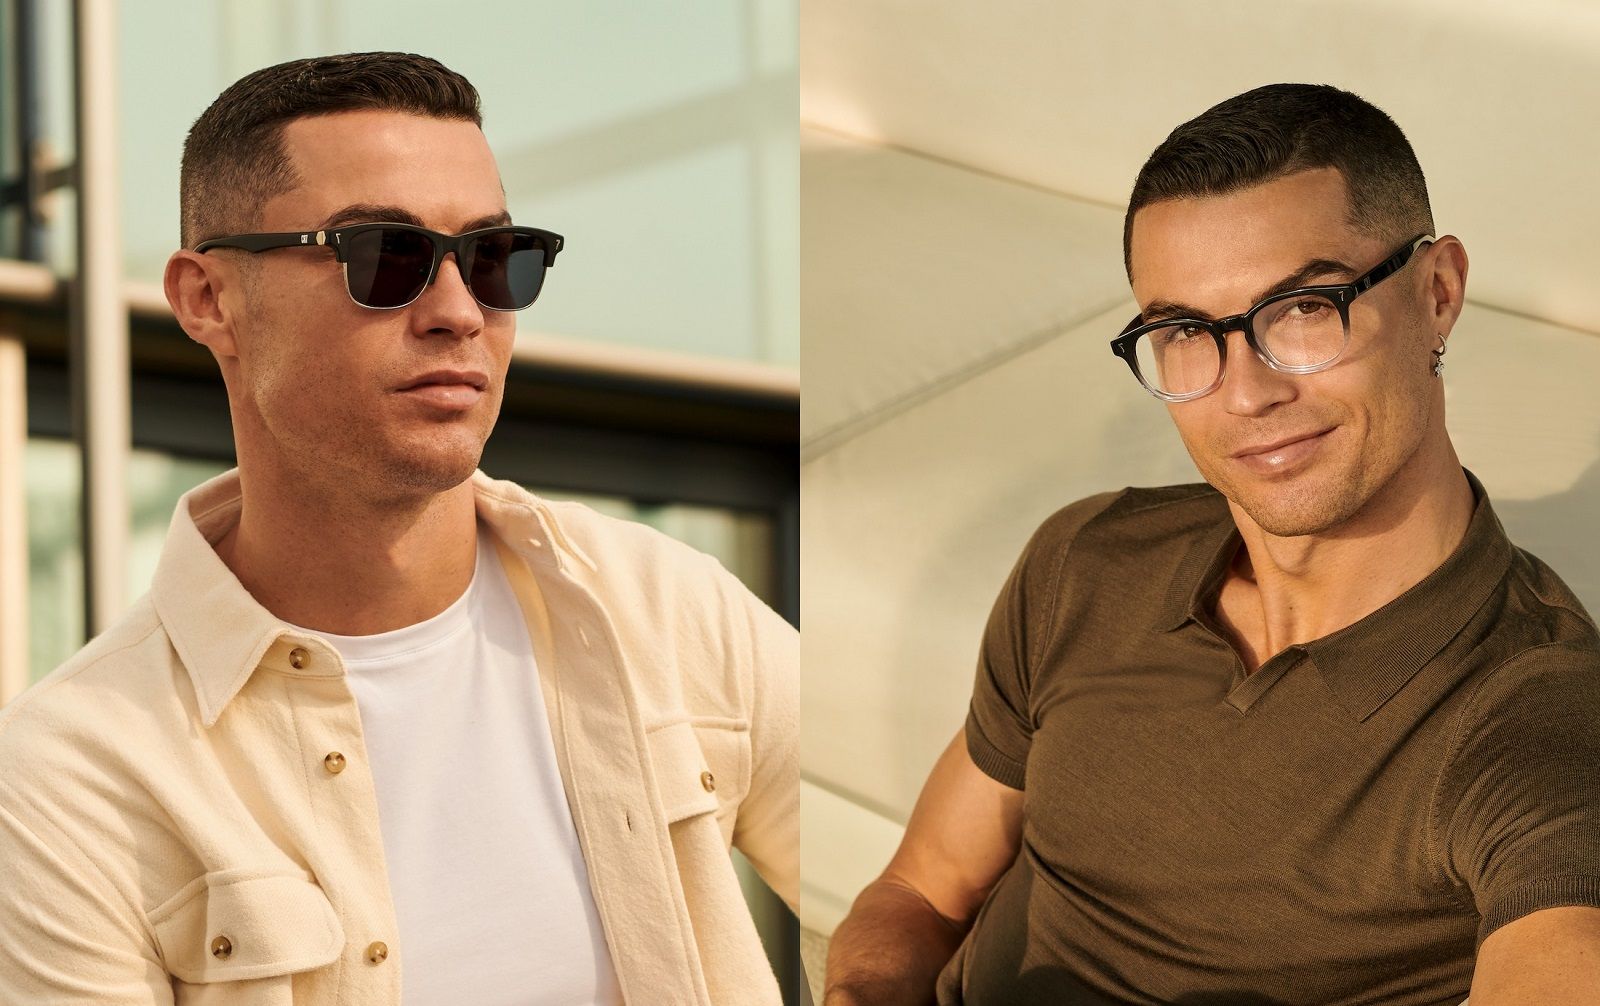 Cristiano Ronaldo - I'm ready to chase the sun with my brand new Eyewear  Collection! See all about my partnership with @ItaliaIndependent at cr7-eyewear.com.  #CR7EYEWEAR #PLAYFECTIONISM